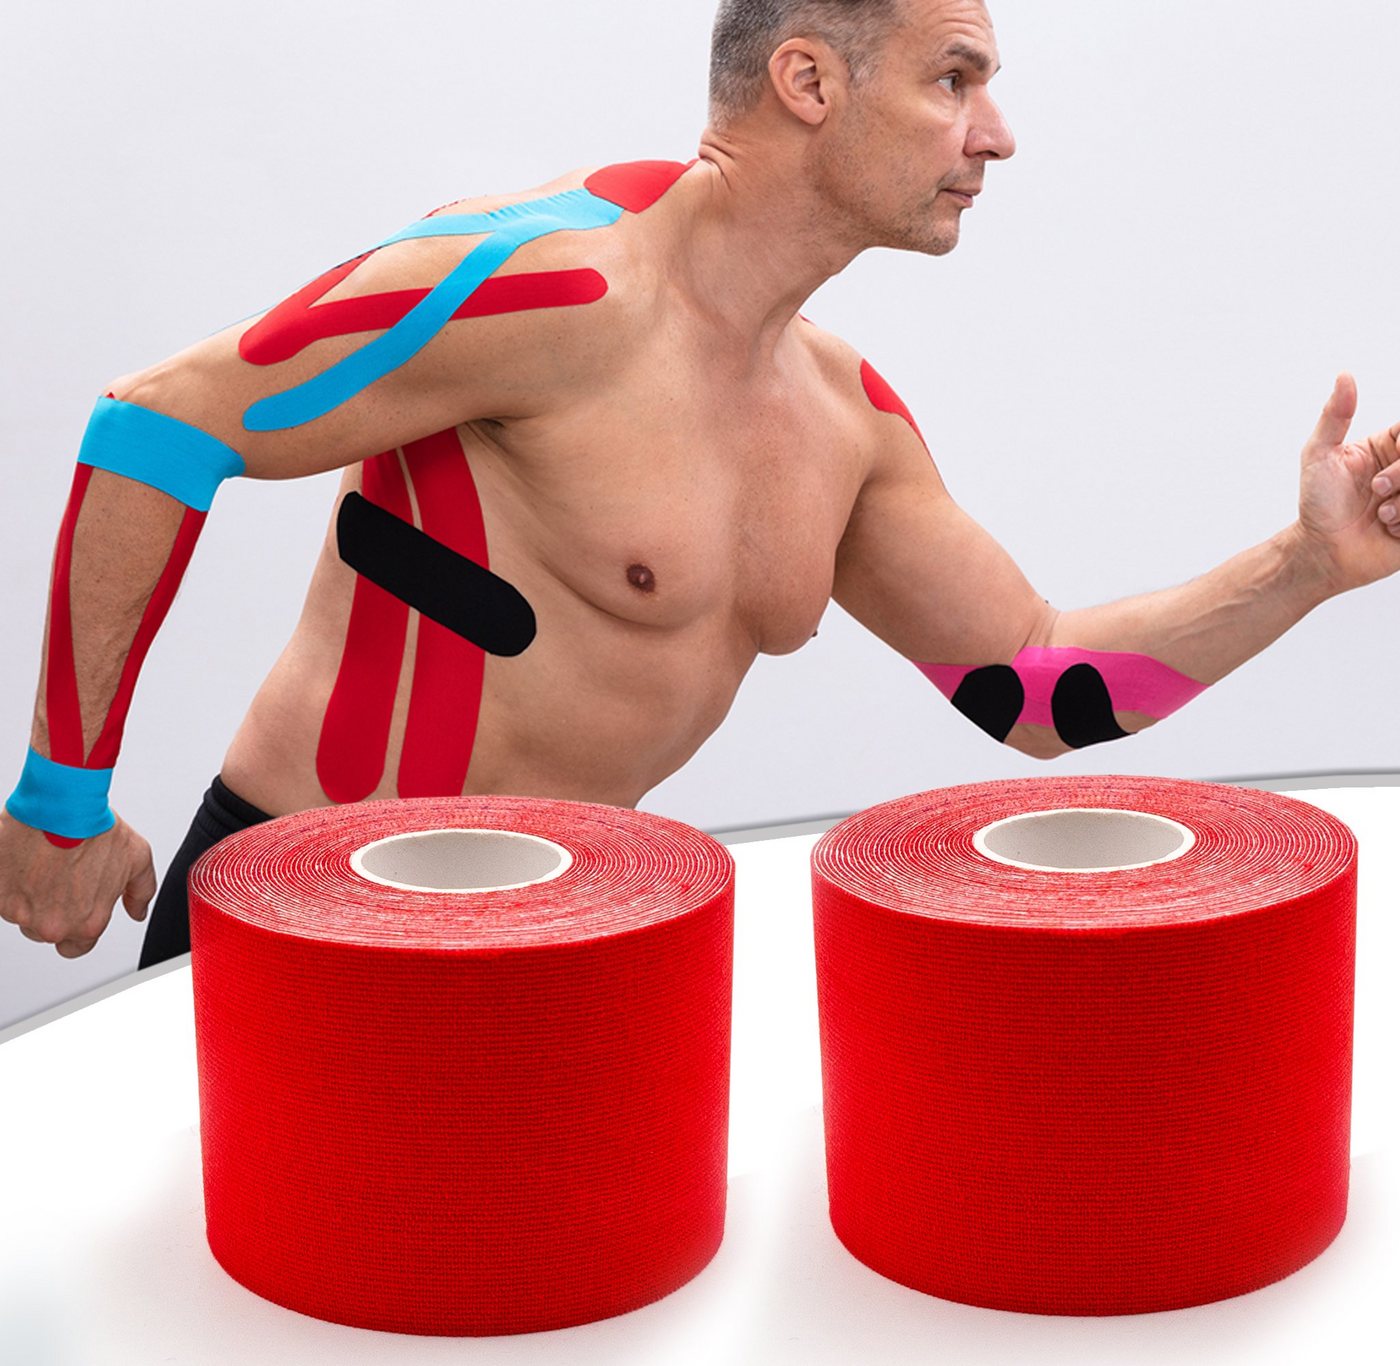 Axion Kinesiologie-Tape Kinesio-Tape - Wasserfestes Tape in rot je 500 x 5 cm, Physiotape (Set, 2-St) von Axion